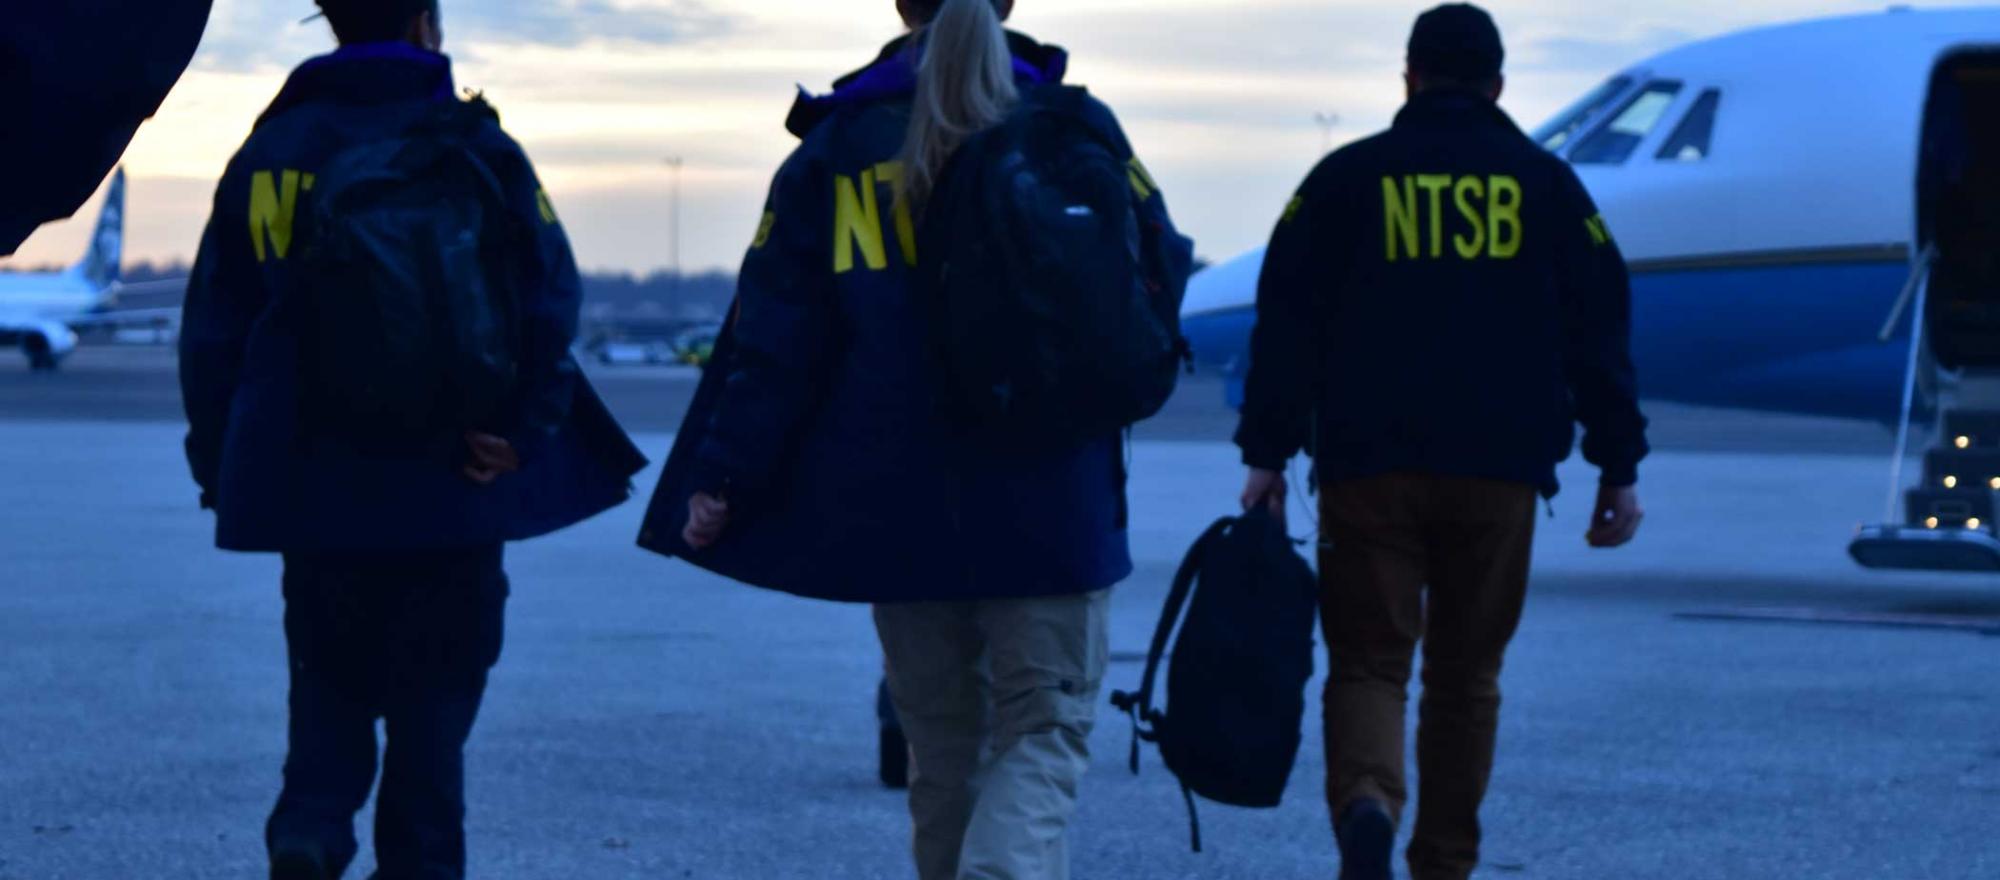 NTSB workers